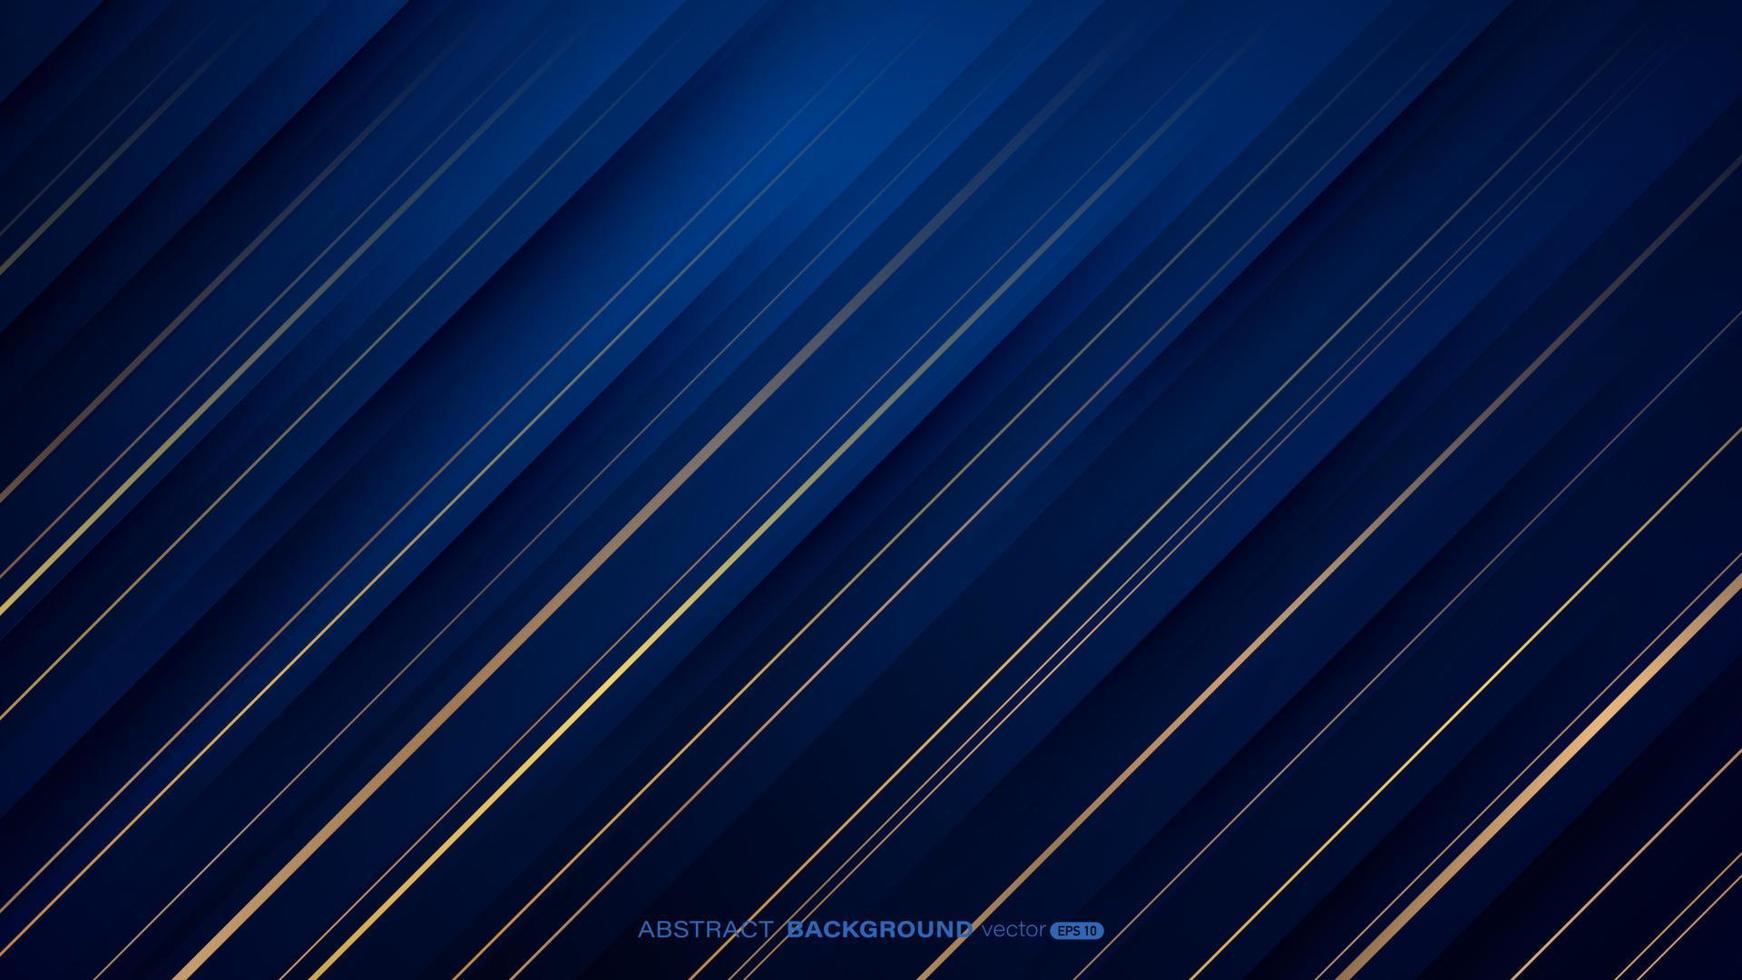 Abstract diagonal gold line striped with light shining on dark blue background vector